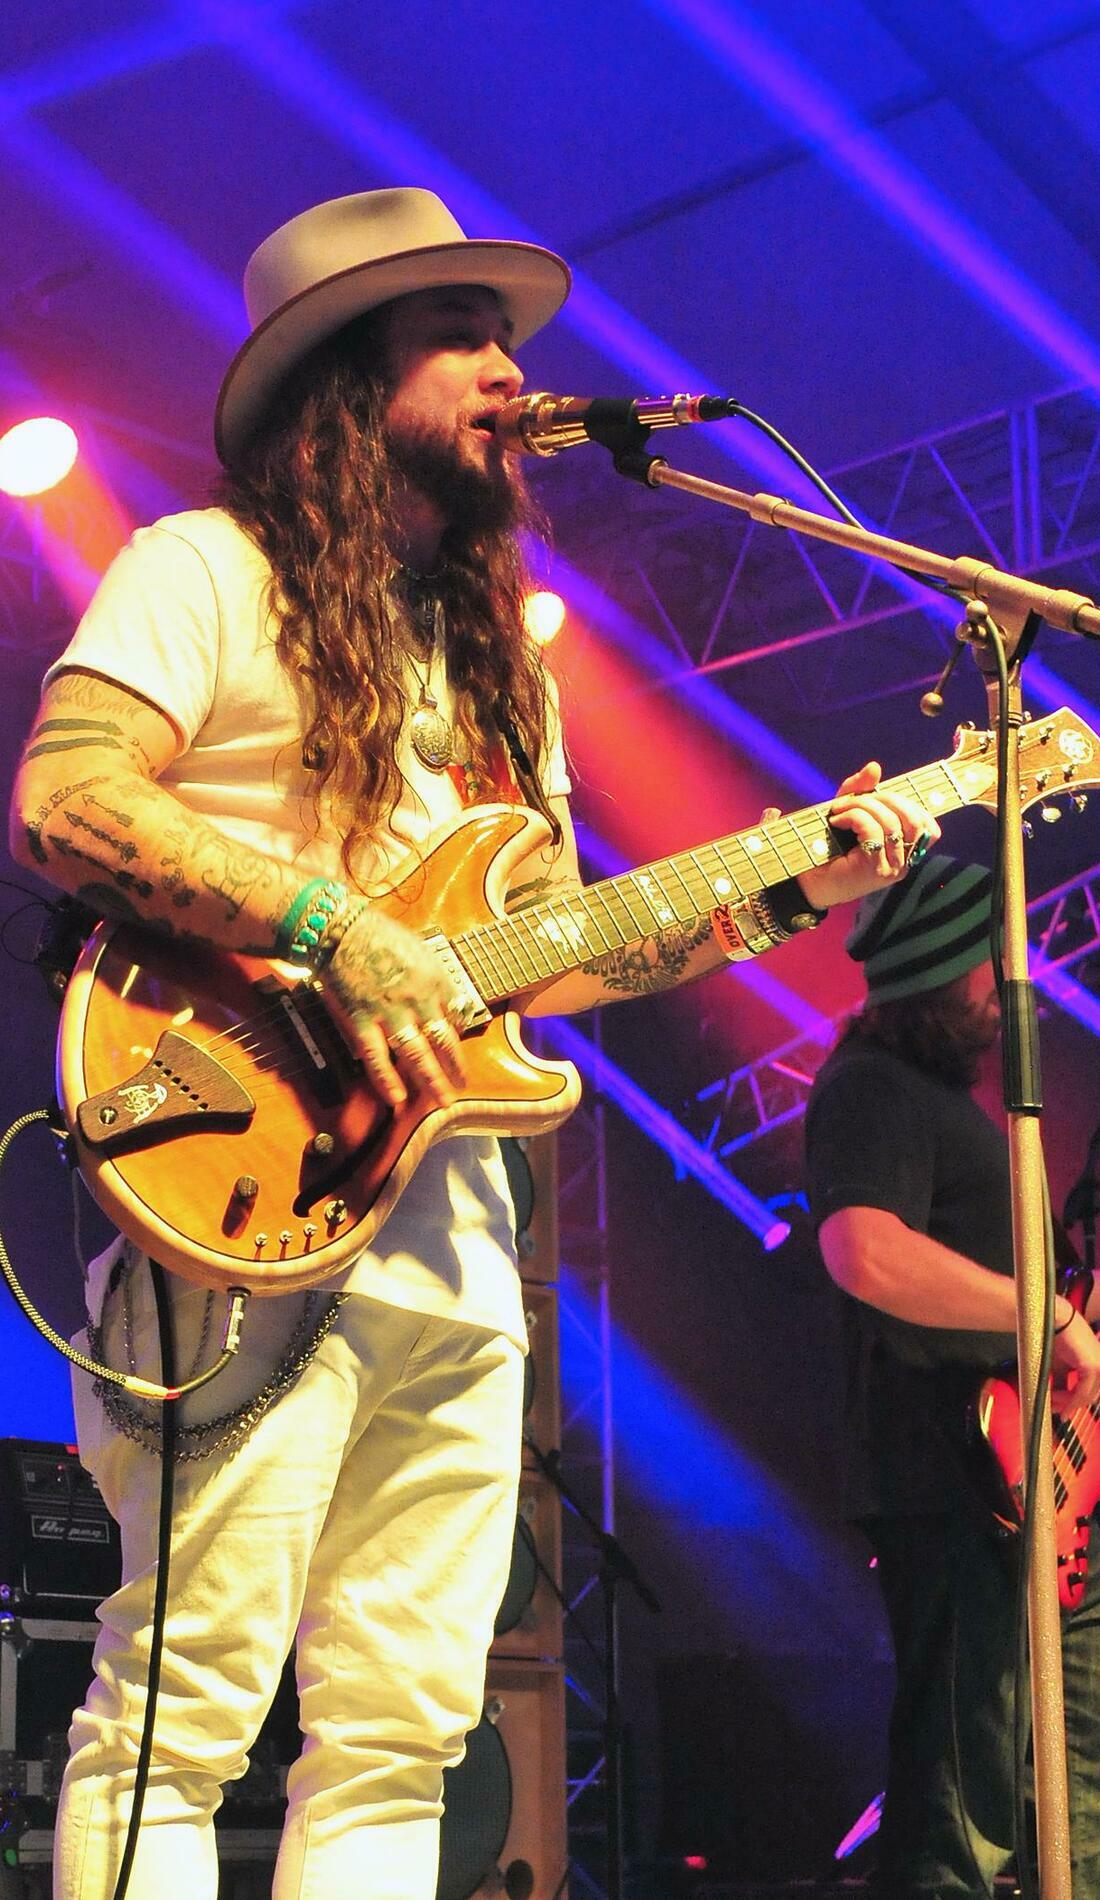 A Twiddle live event